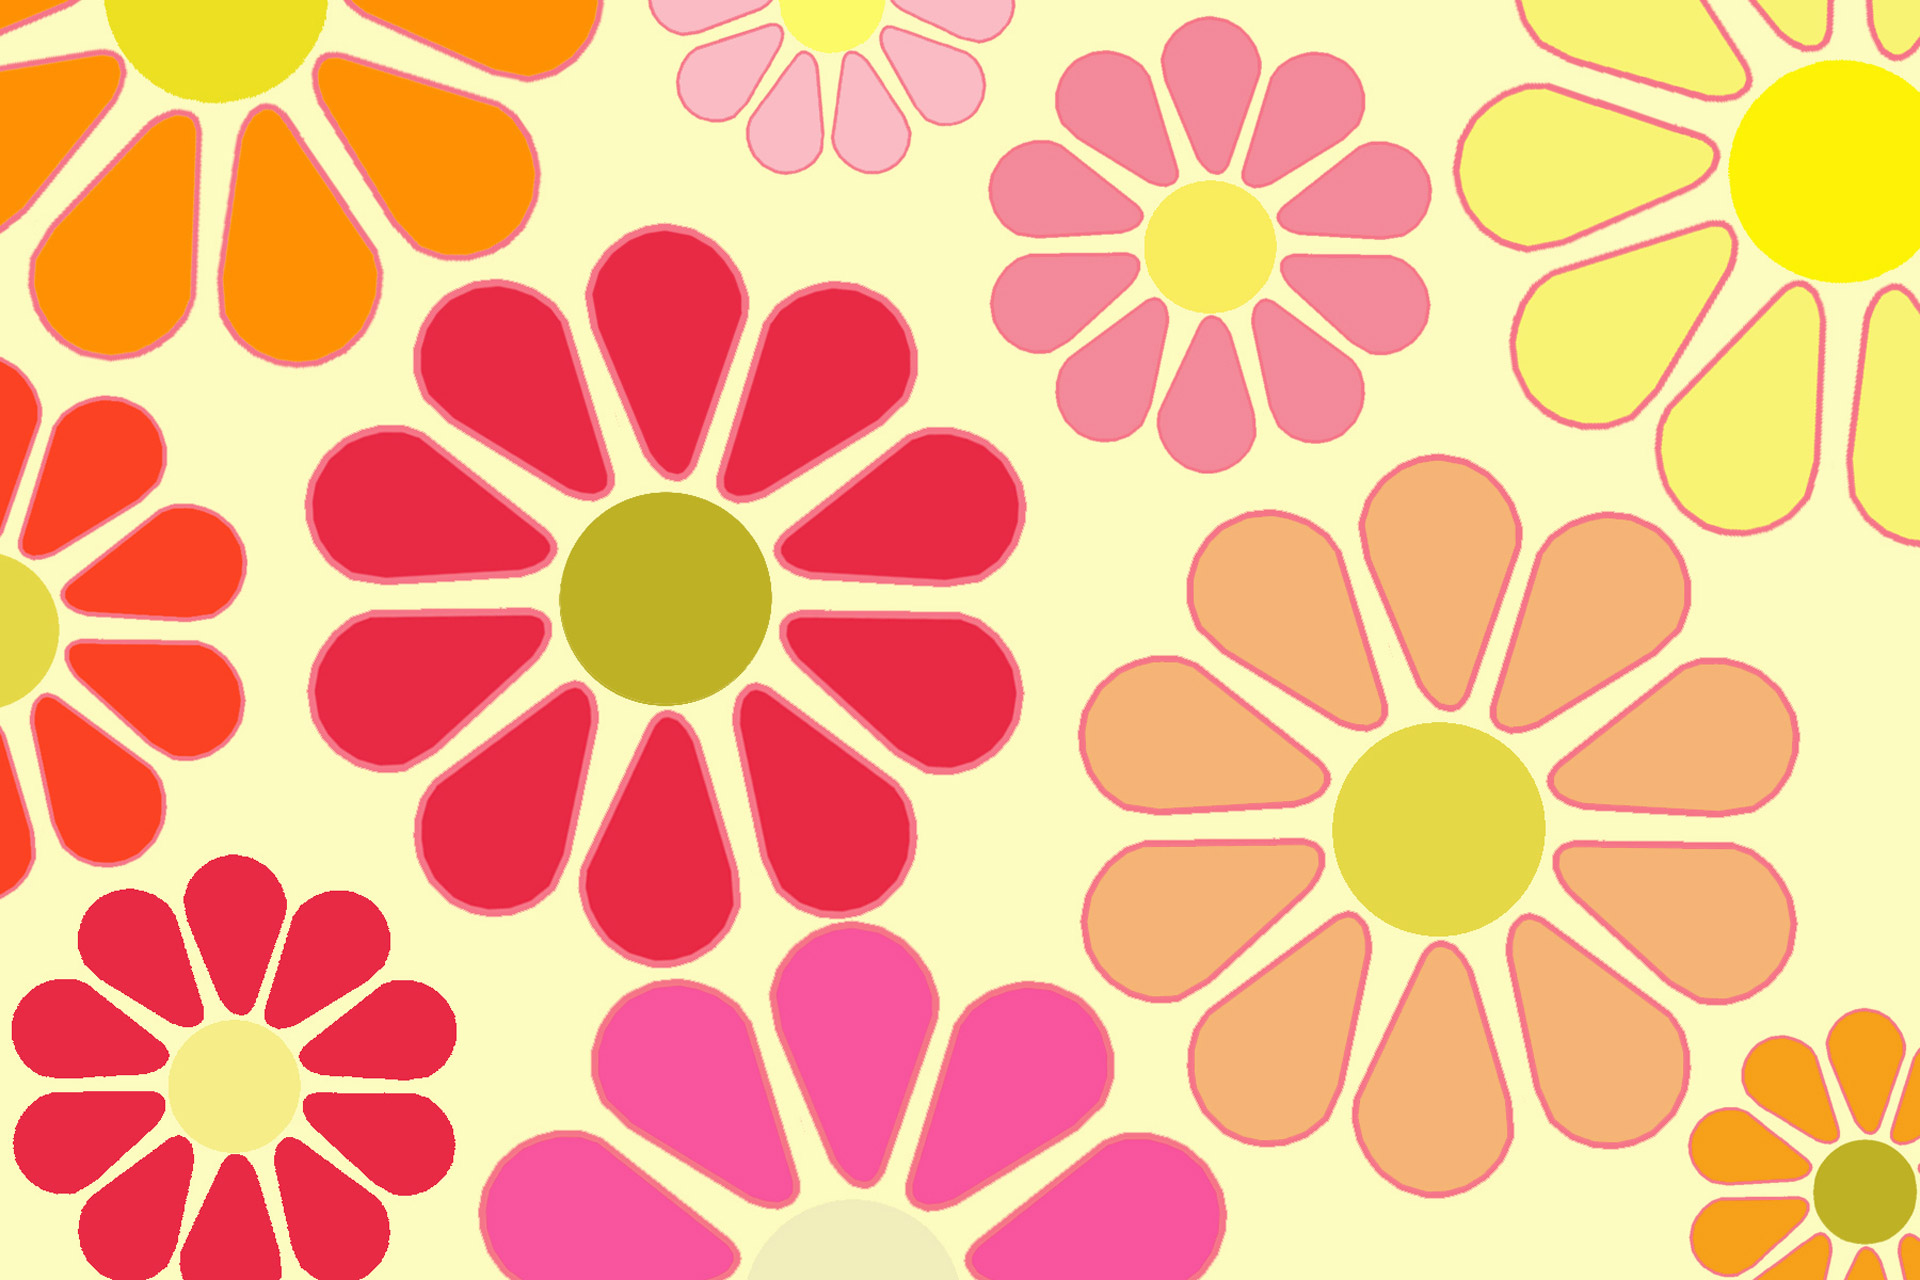 Clip Arts Related To : peace and love flower power girl. view all Flower Po...